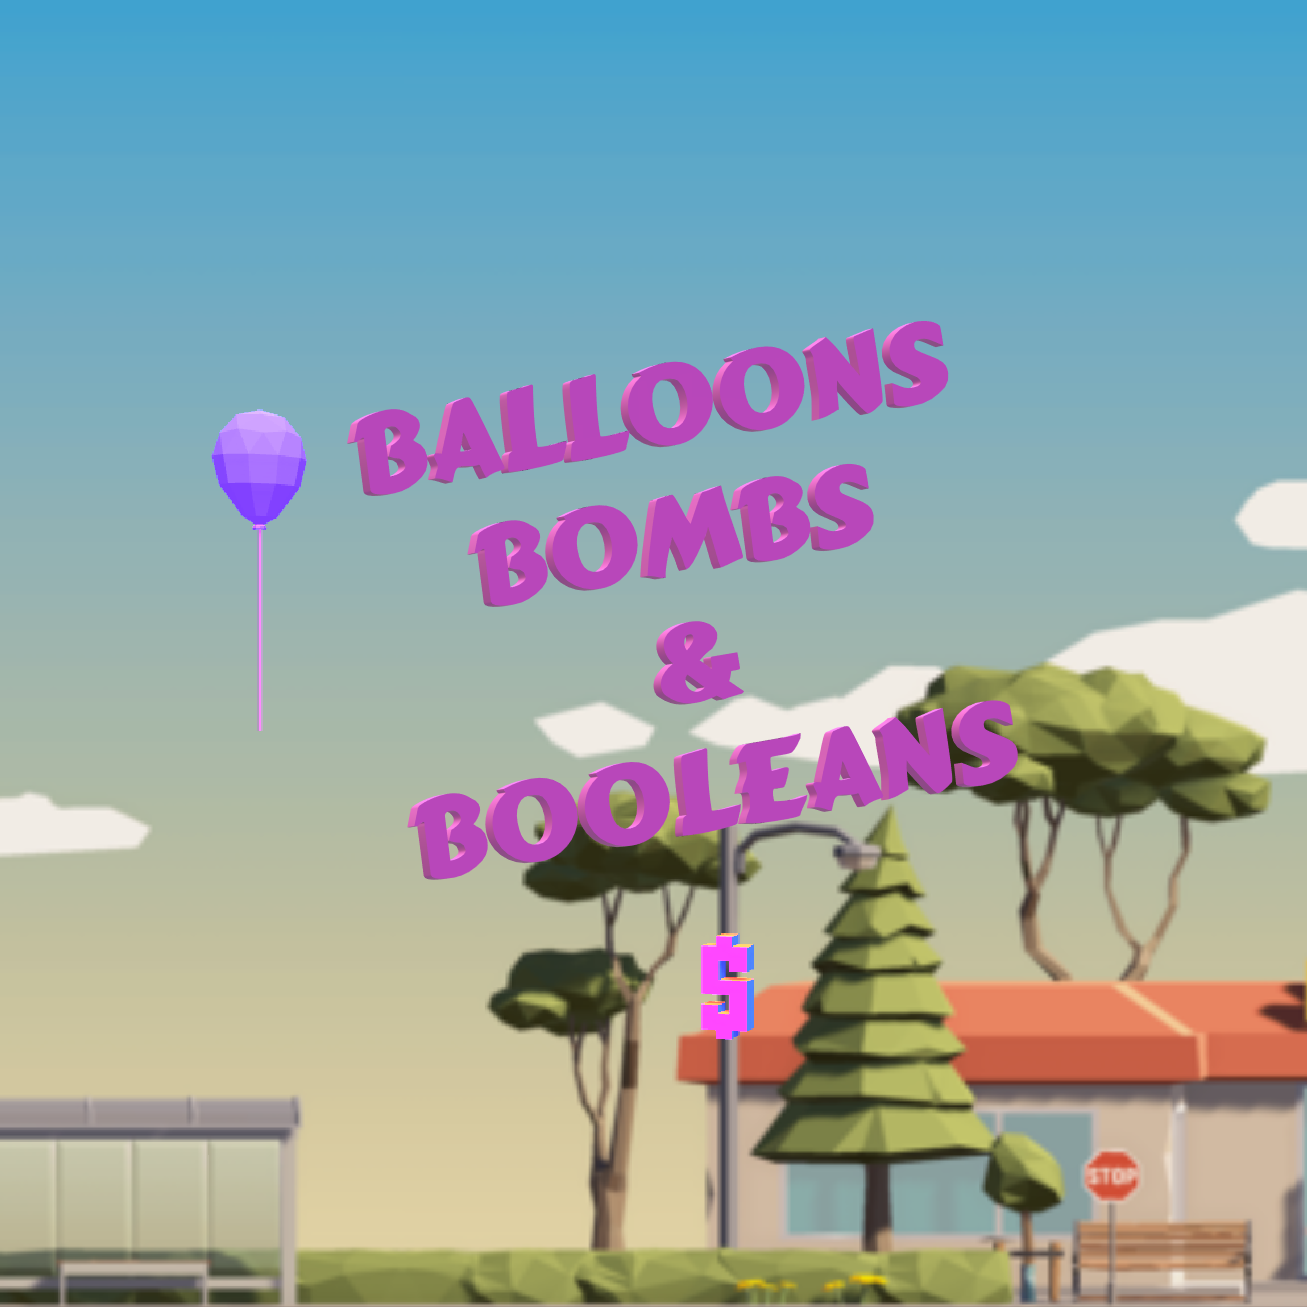 Balloons Bombs & Booleans